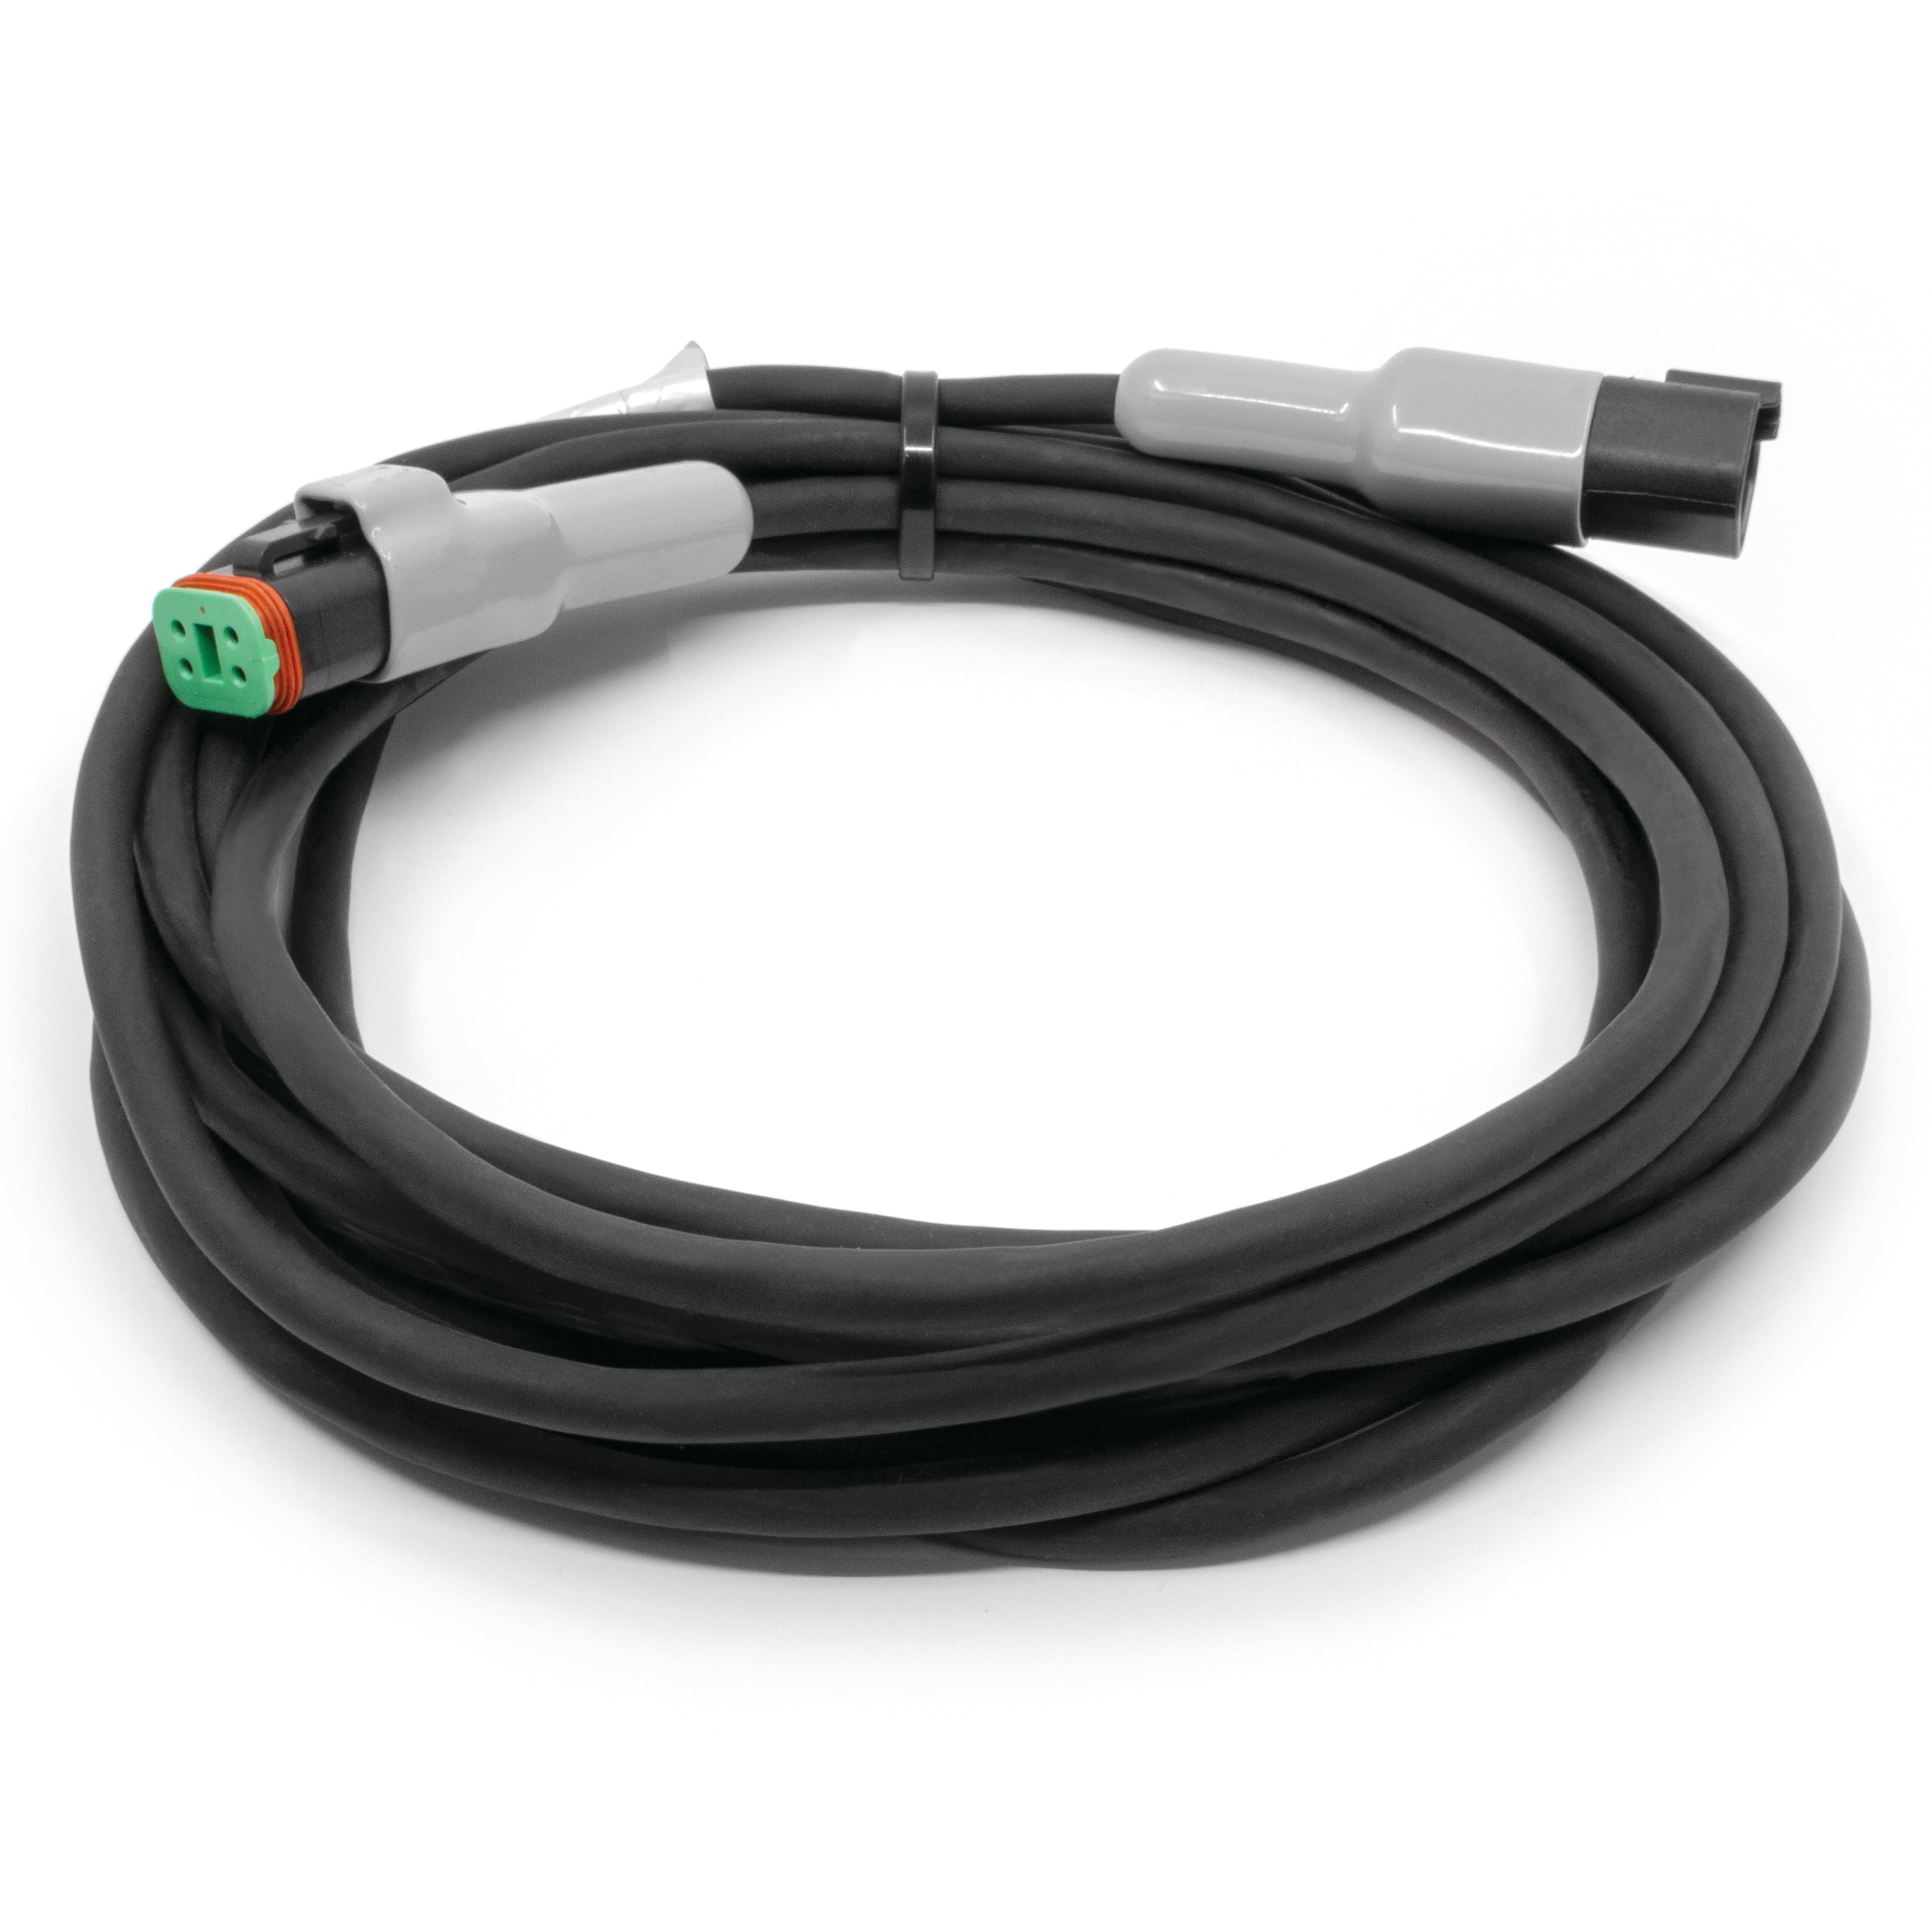 2 metre extension cable for Backsense radar detection systems